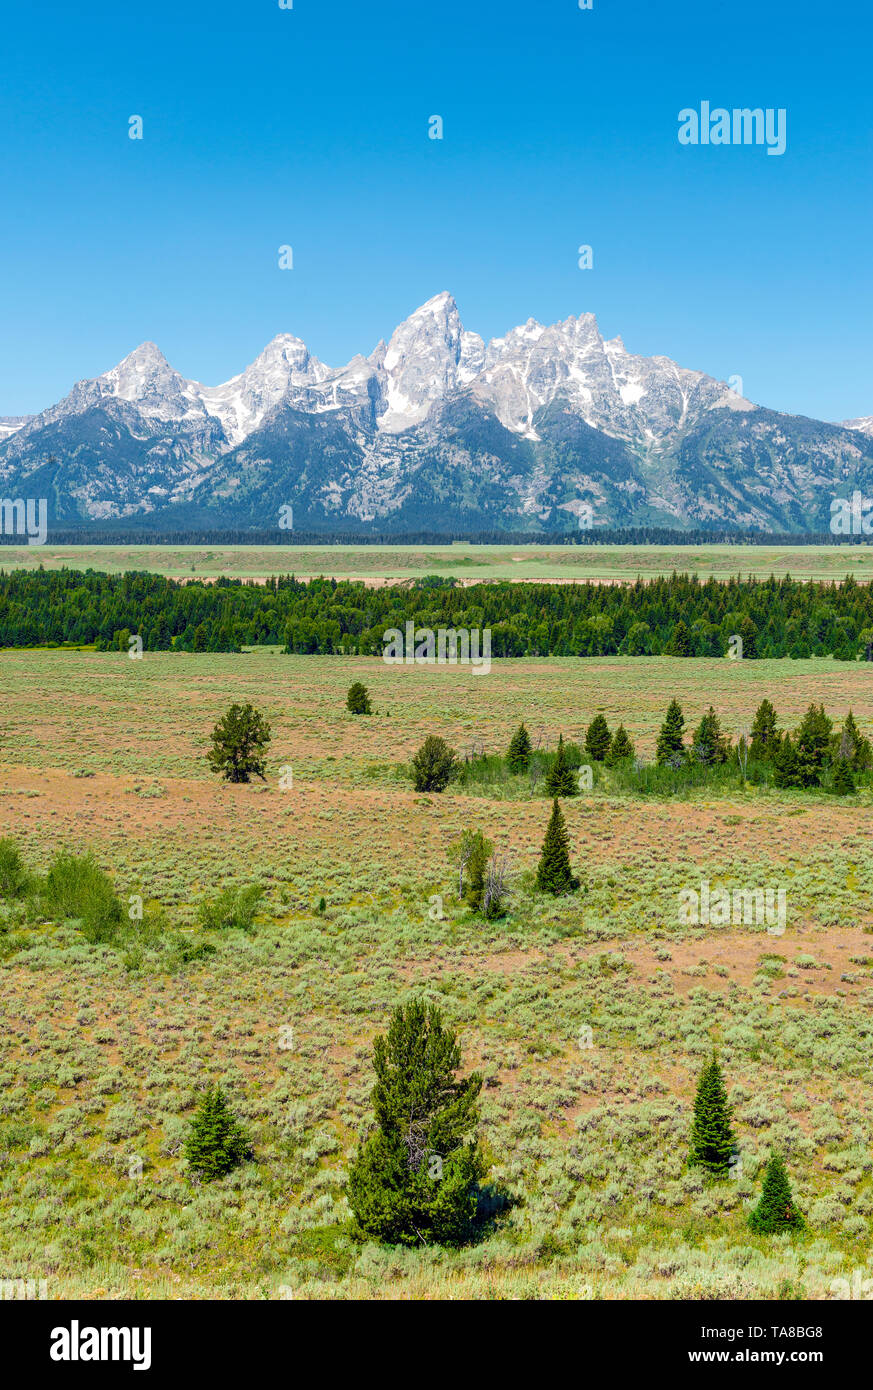 The majestic peaks of the Grand Tetons on a bright summer day with a pine tree forest in the foreground, Grand Teton national park, Wyoming, USA. Stock Photo